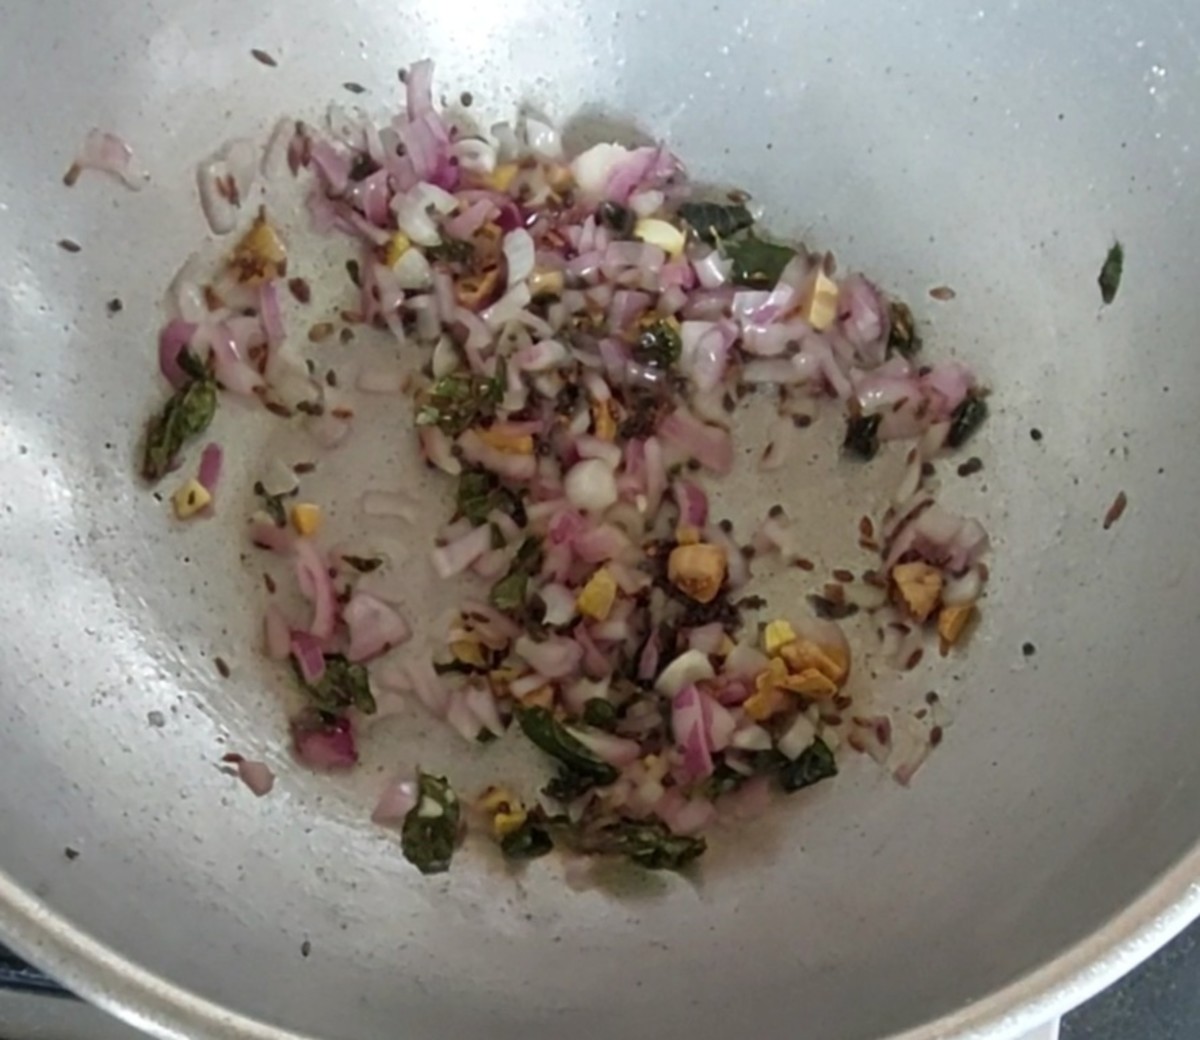 Add 1/2 cup chopped onion, saute for 1 minute, and add salt to taste. Fry the onion till it is translucent (adding salt hastens the cooking time of the onion).